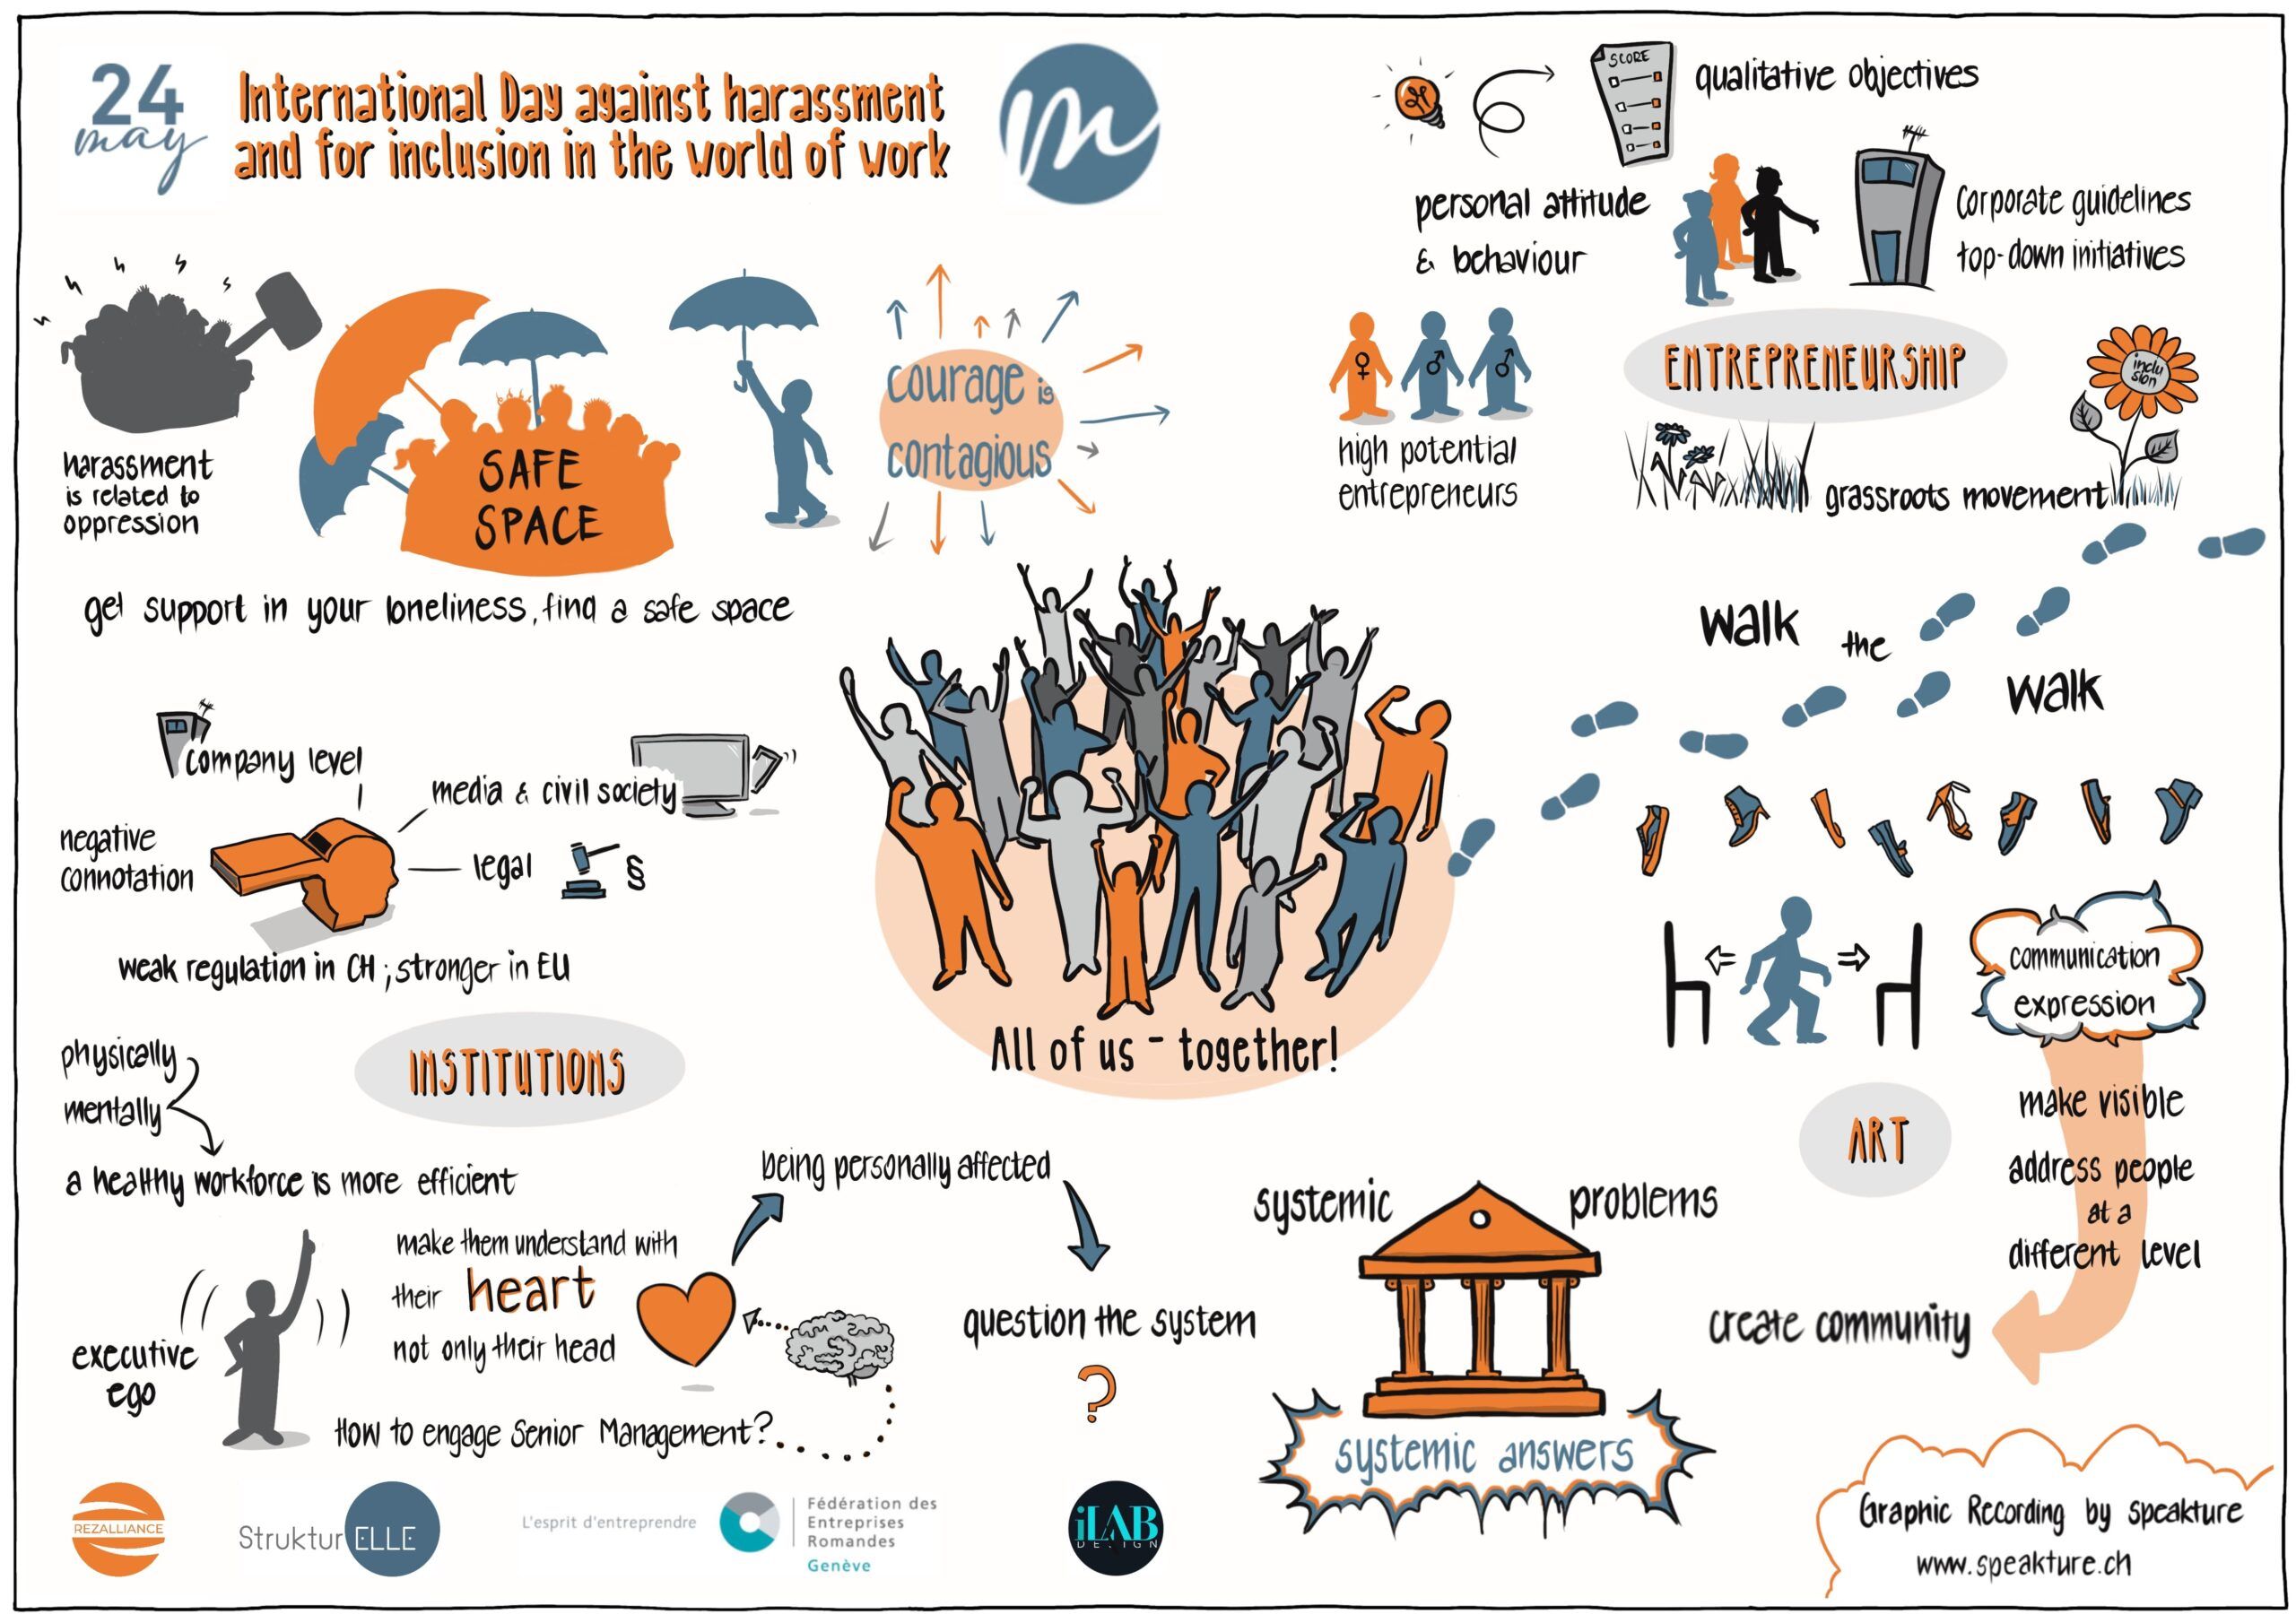 Graphic Recording by speakture for the International Day against harassment and for inclusion in the world of work